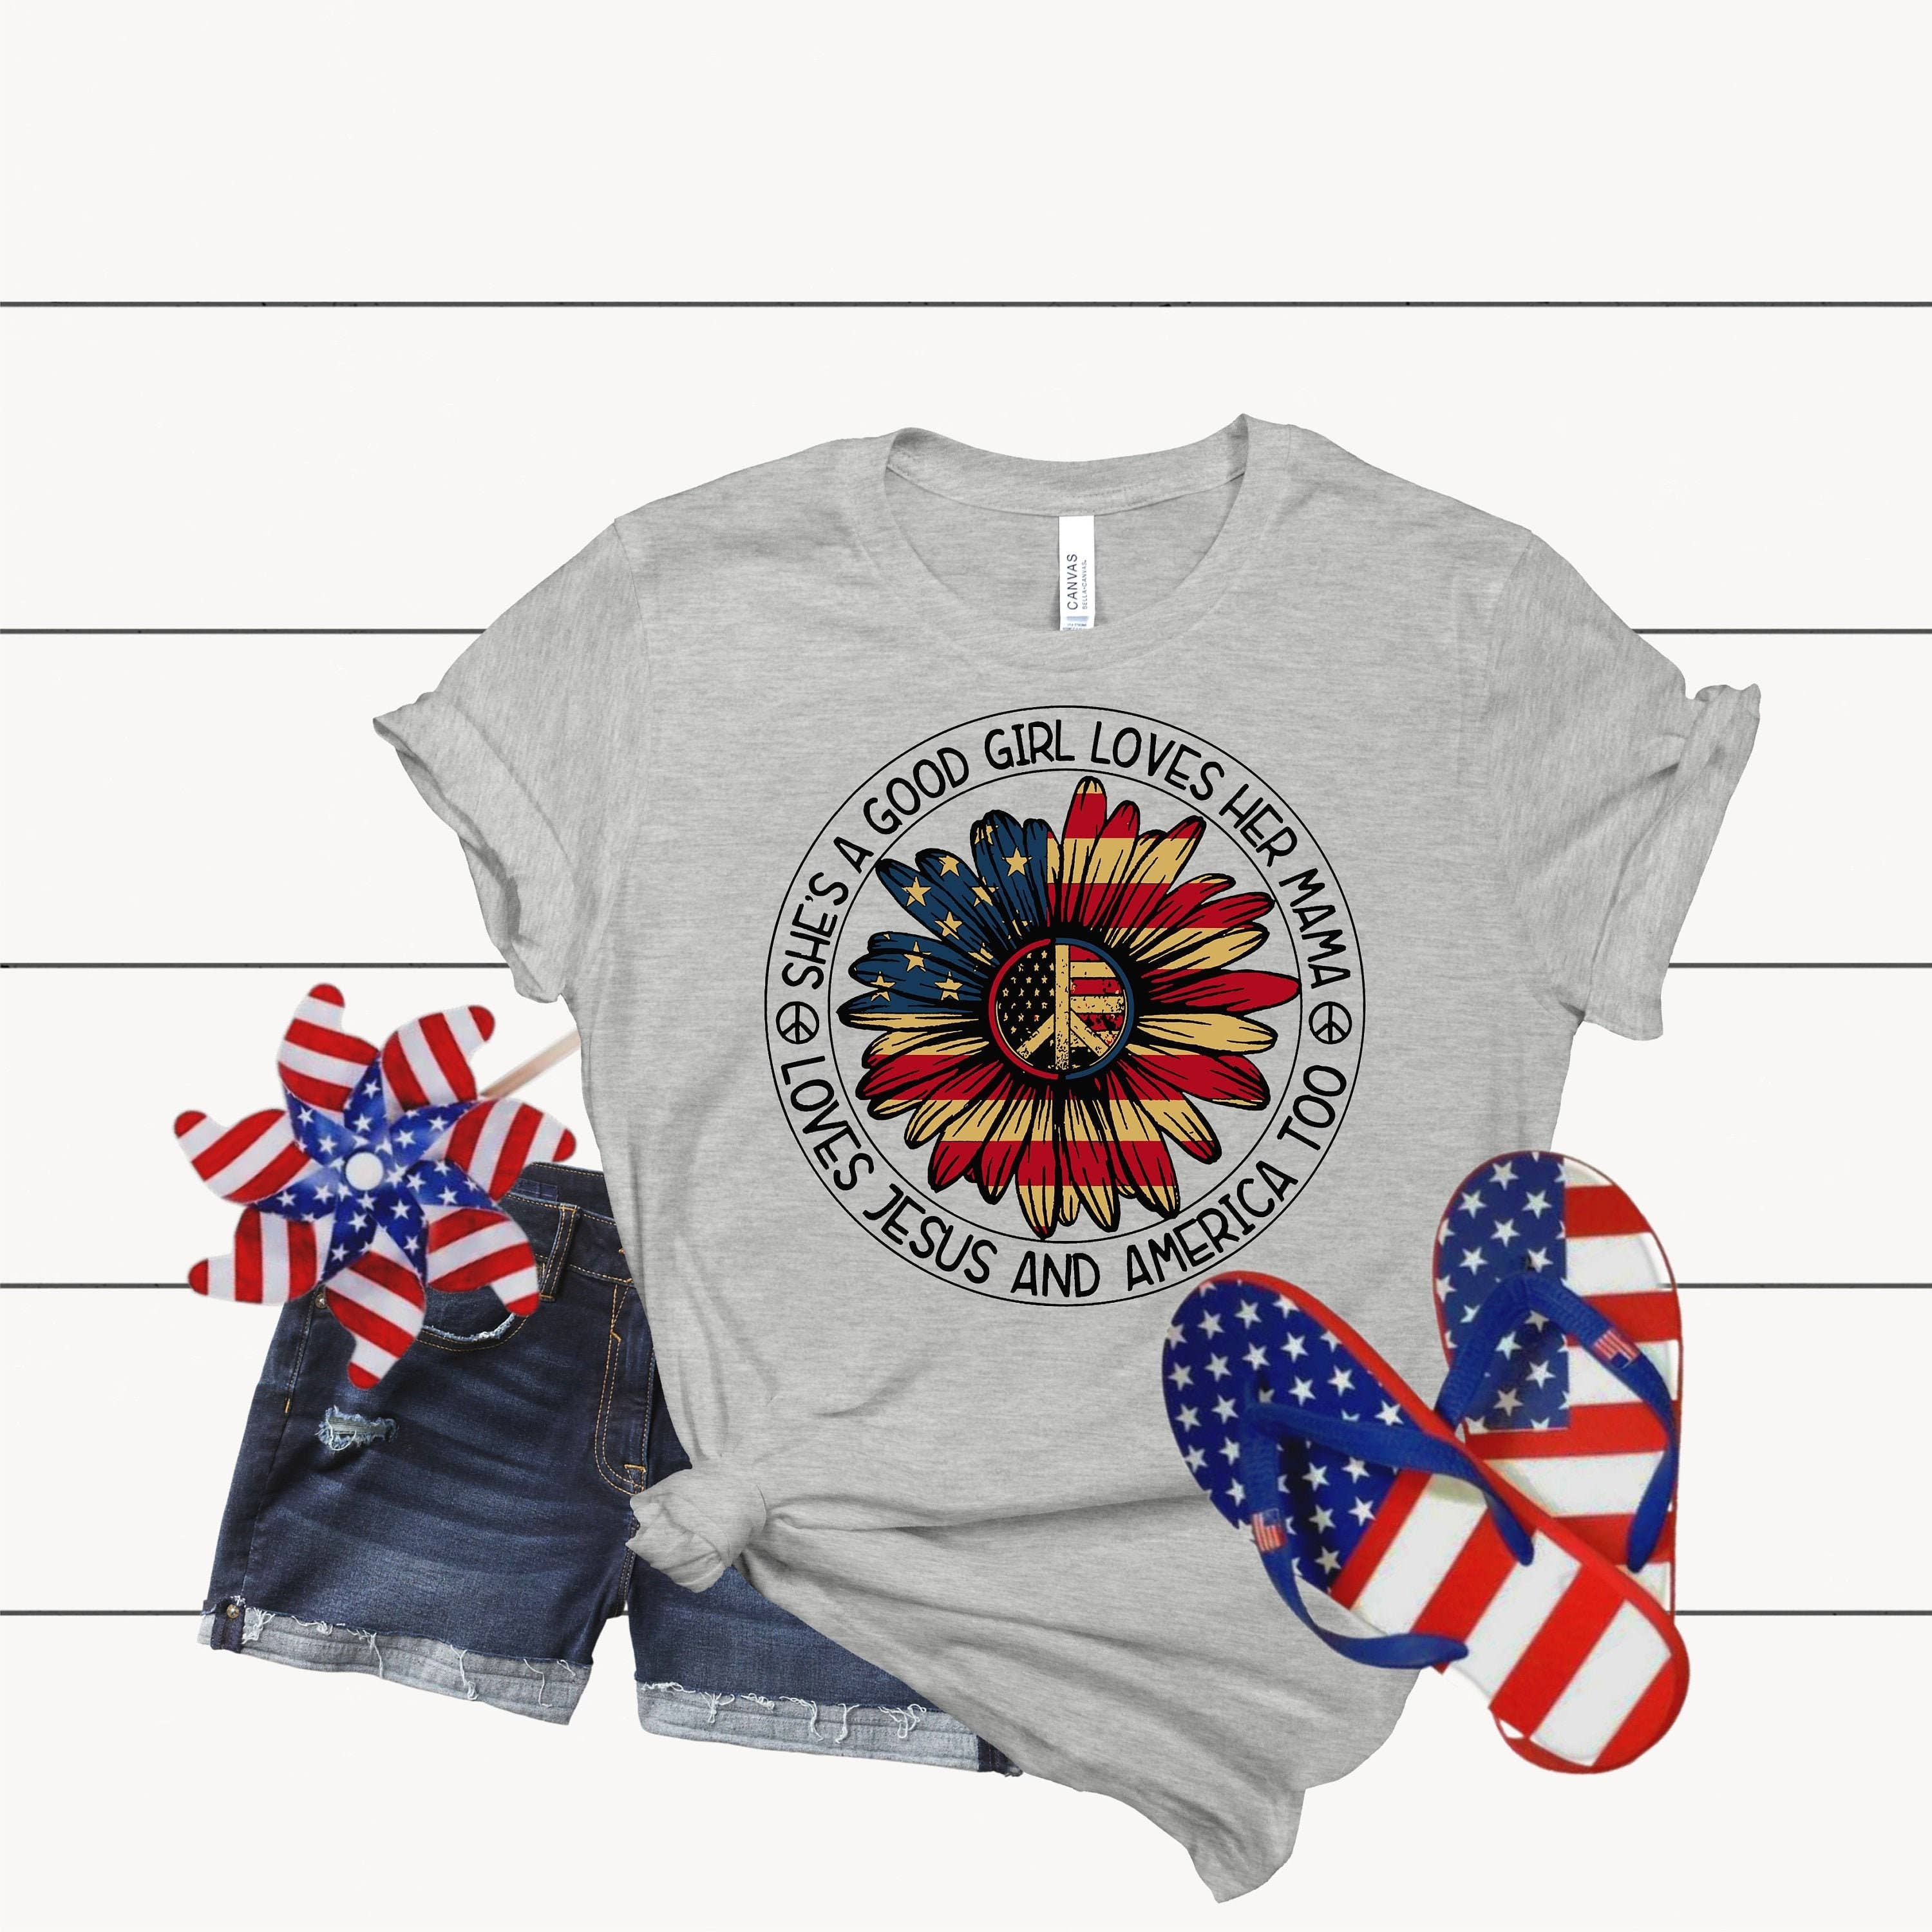 Patriotic Shirt 4th of july stars and stripes american babe shirt flag shirt 4th of July Women's Shirt unisex shirt 4th of July Shirt